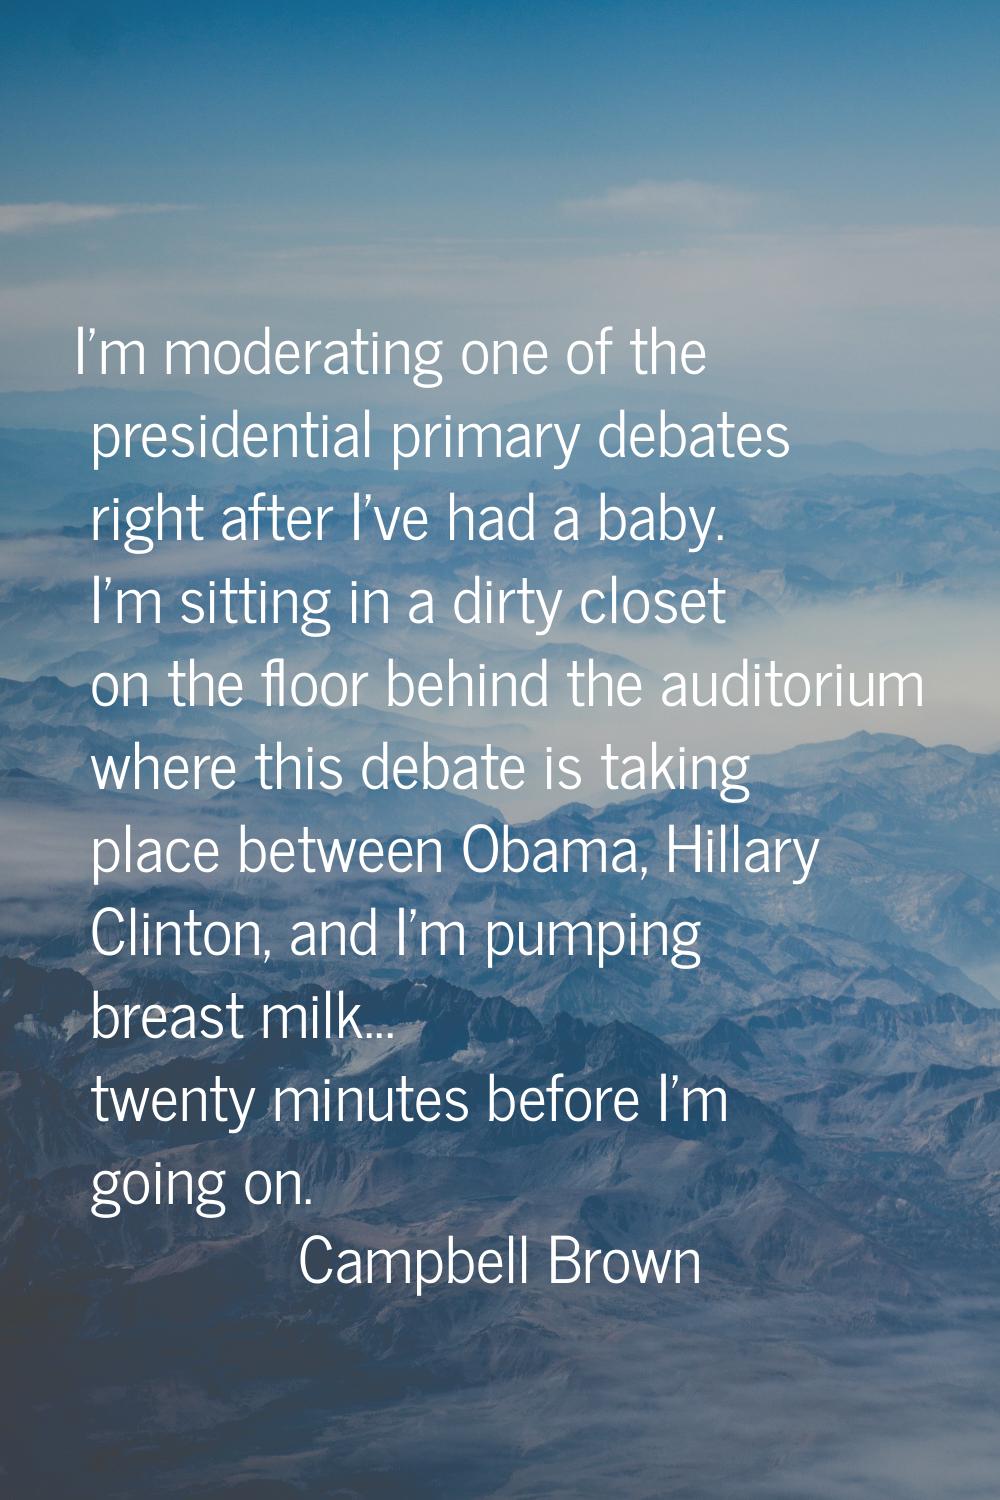 I'm moderating one of the presidential primary debates right after I've had a baby. I'm sitting in 